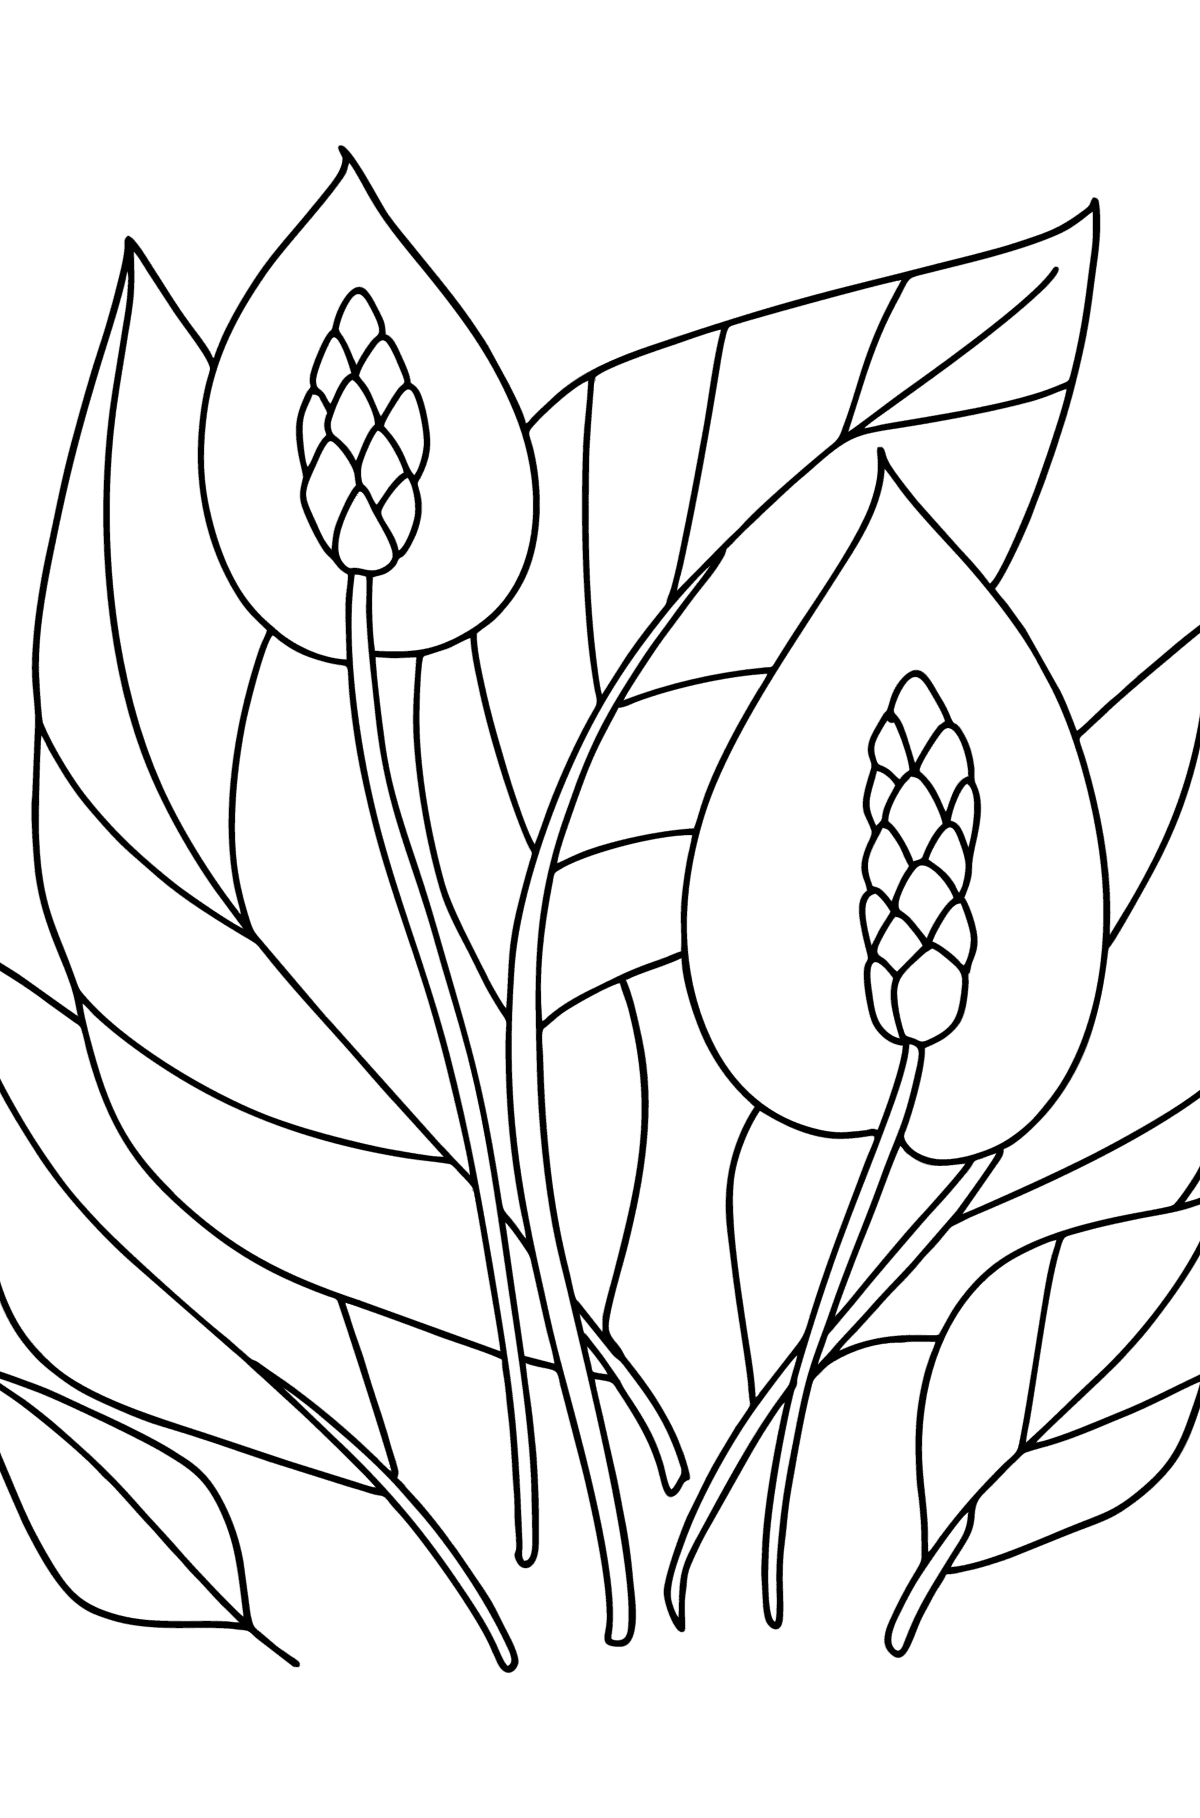 Spathiphyllum coloring page - Coloring Pages for Kids